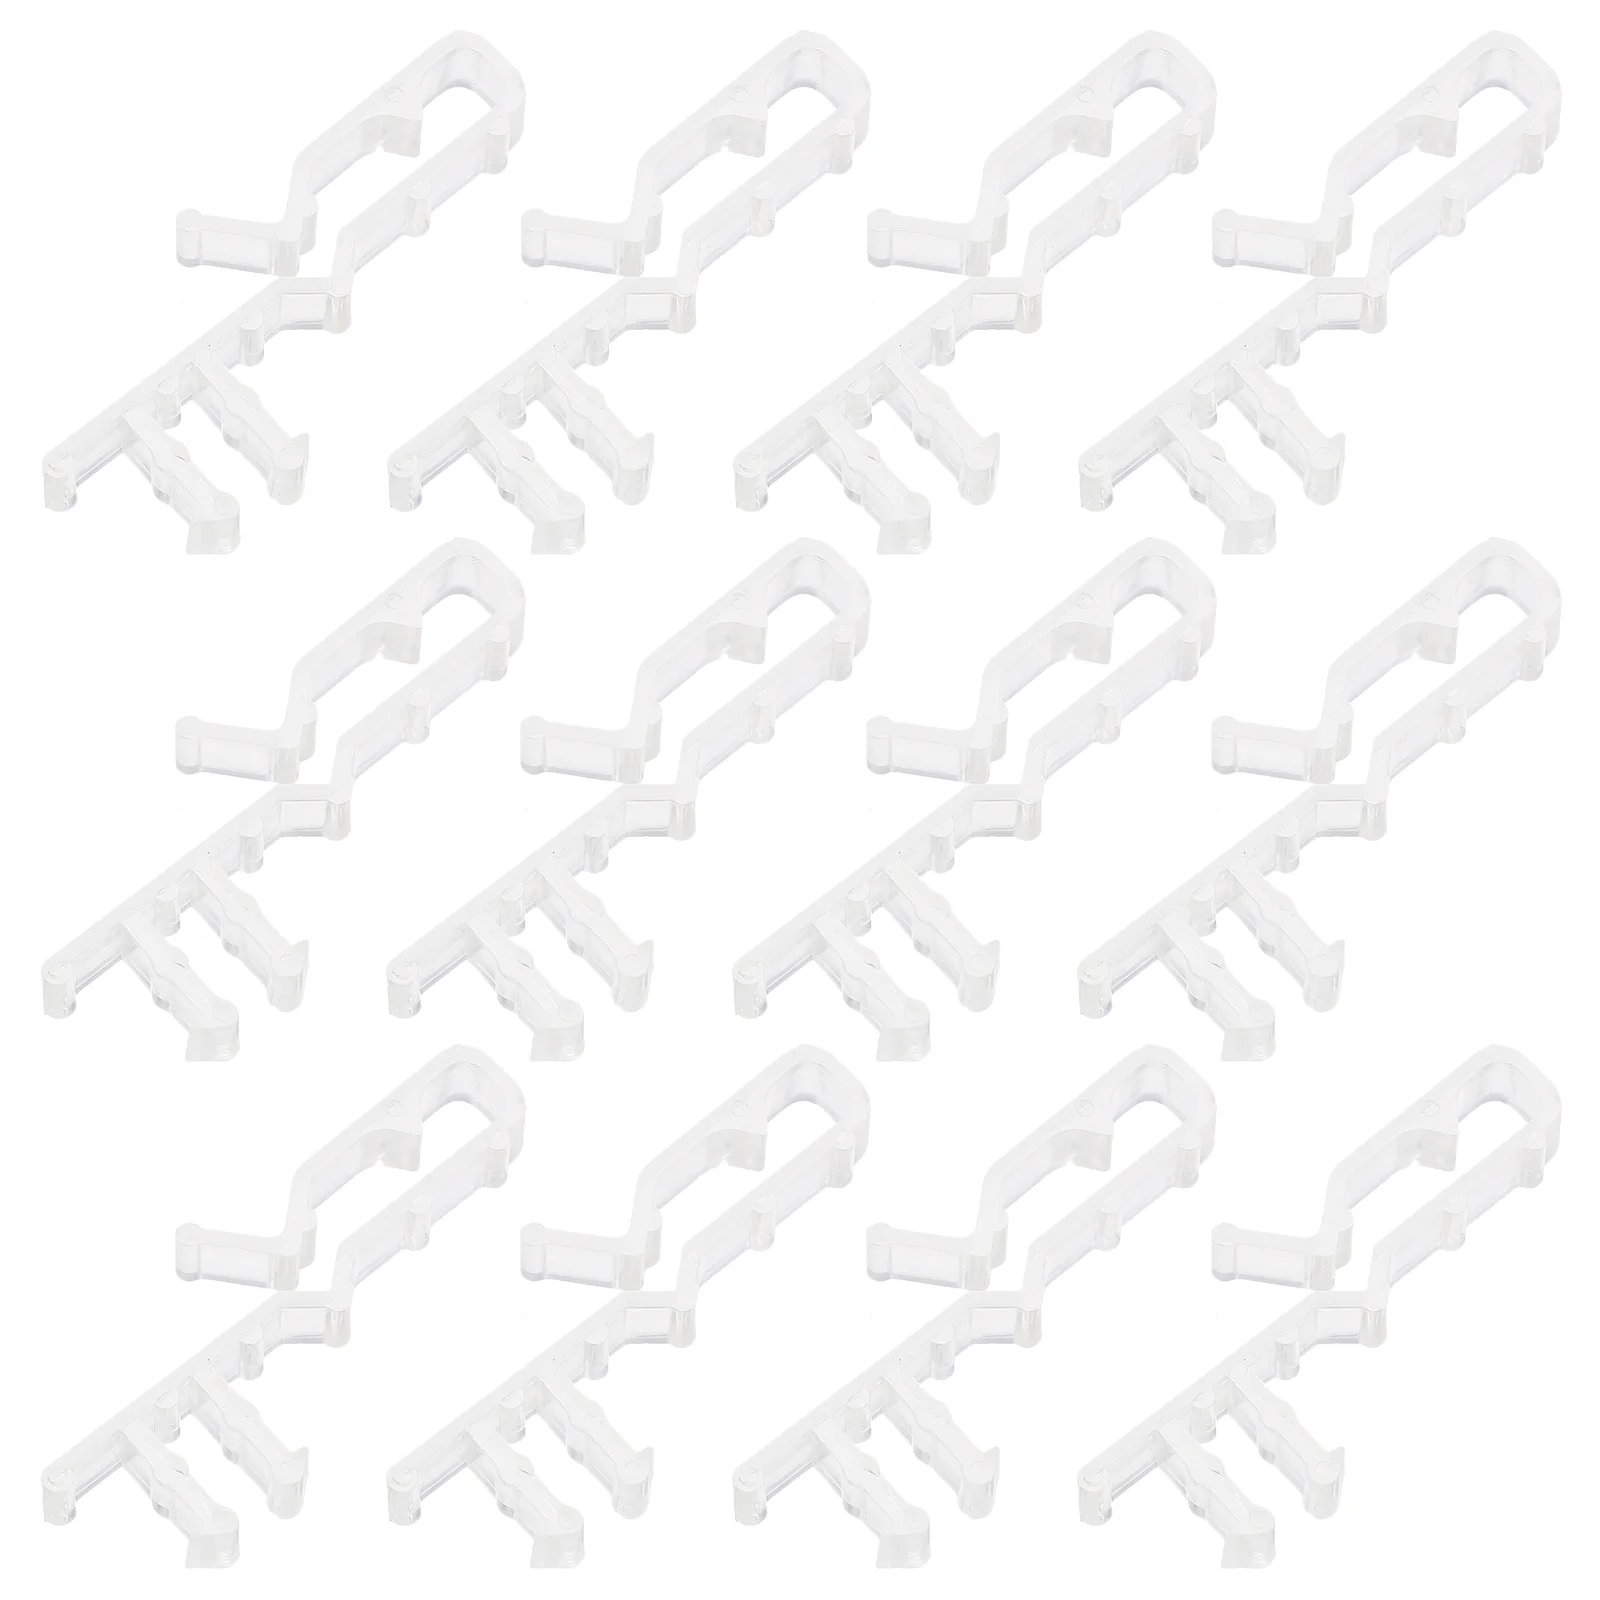 

12 Pcs Sheer Curtains Blind Replacement Parts Replaceable Vertical Valance Clips for Blinds Acrylic Window